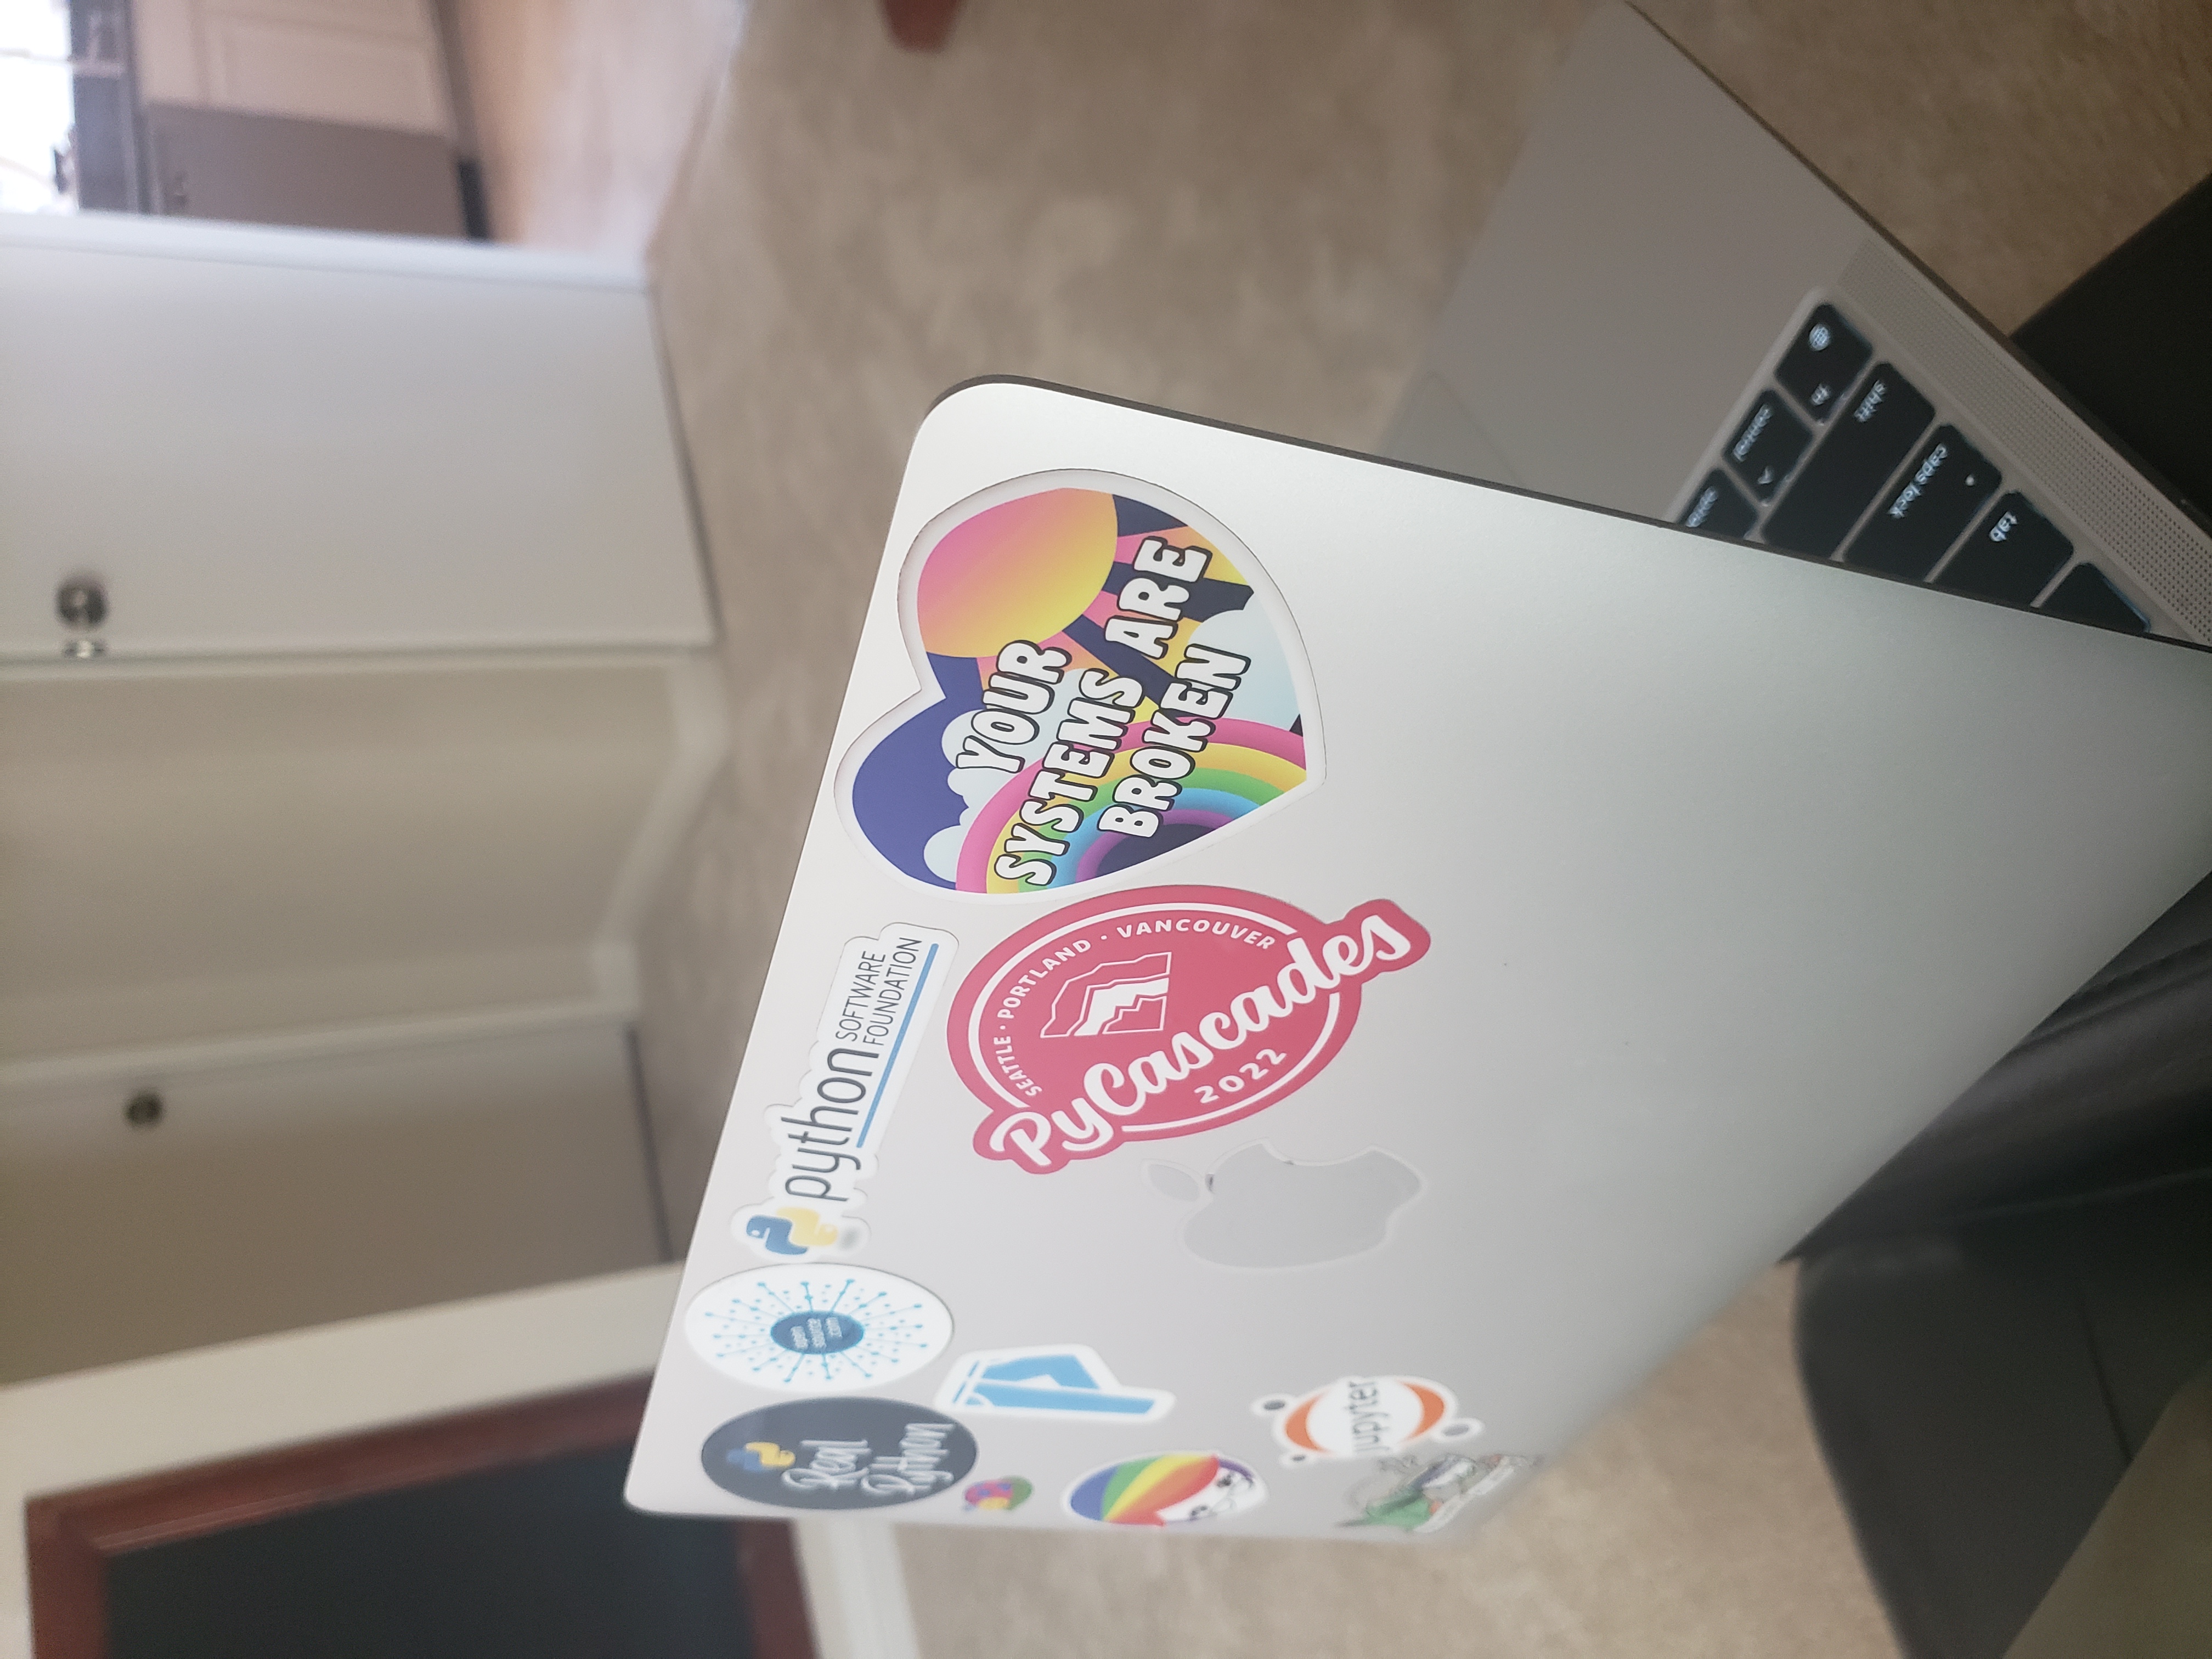 M1 MacBook Air with stickers